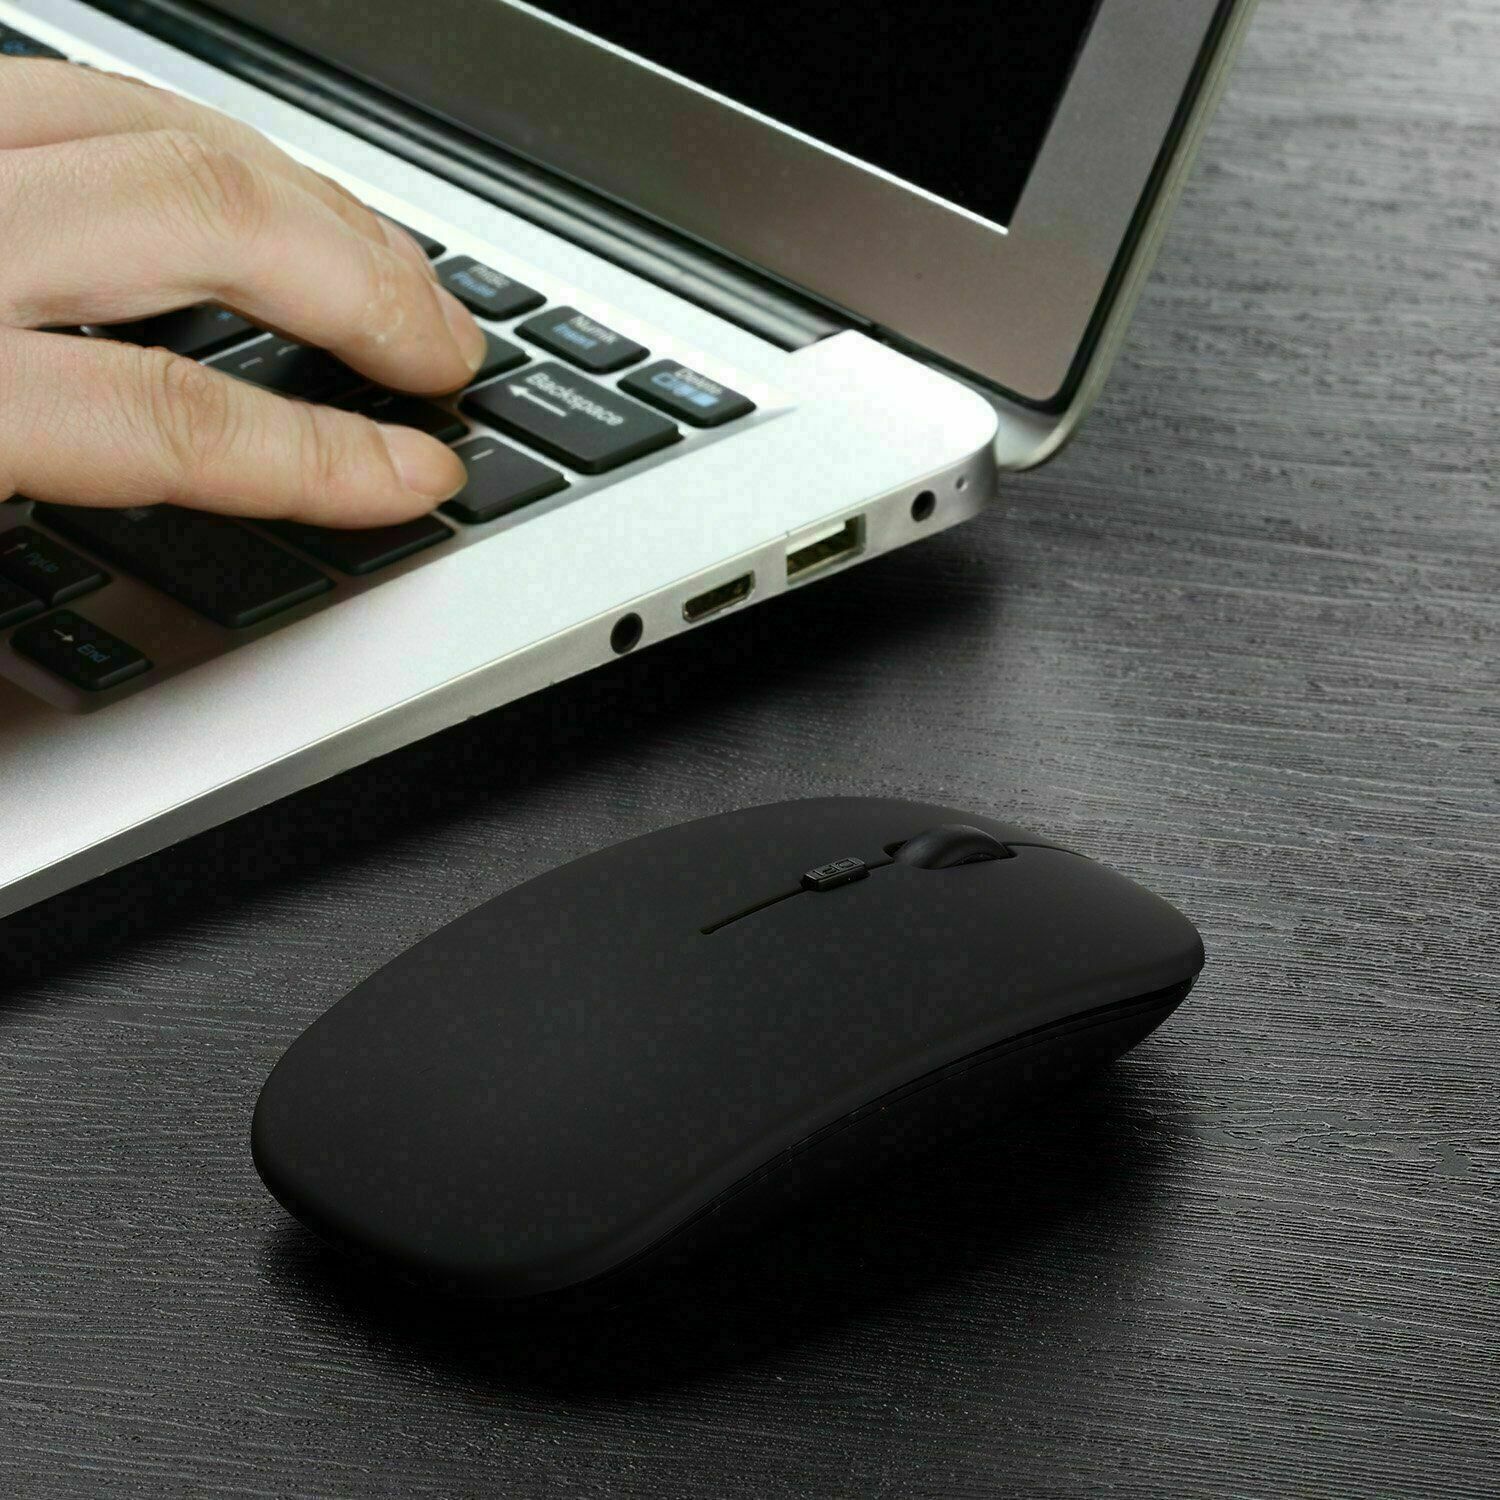 Ozoffer Optical Wireless Bluetooth 5.1 Slim Rechargeable Mouse for Laptop Mac?iPad